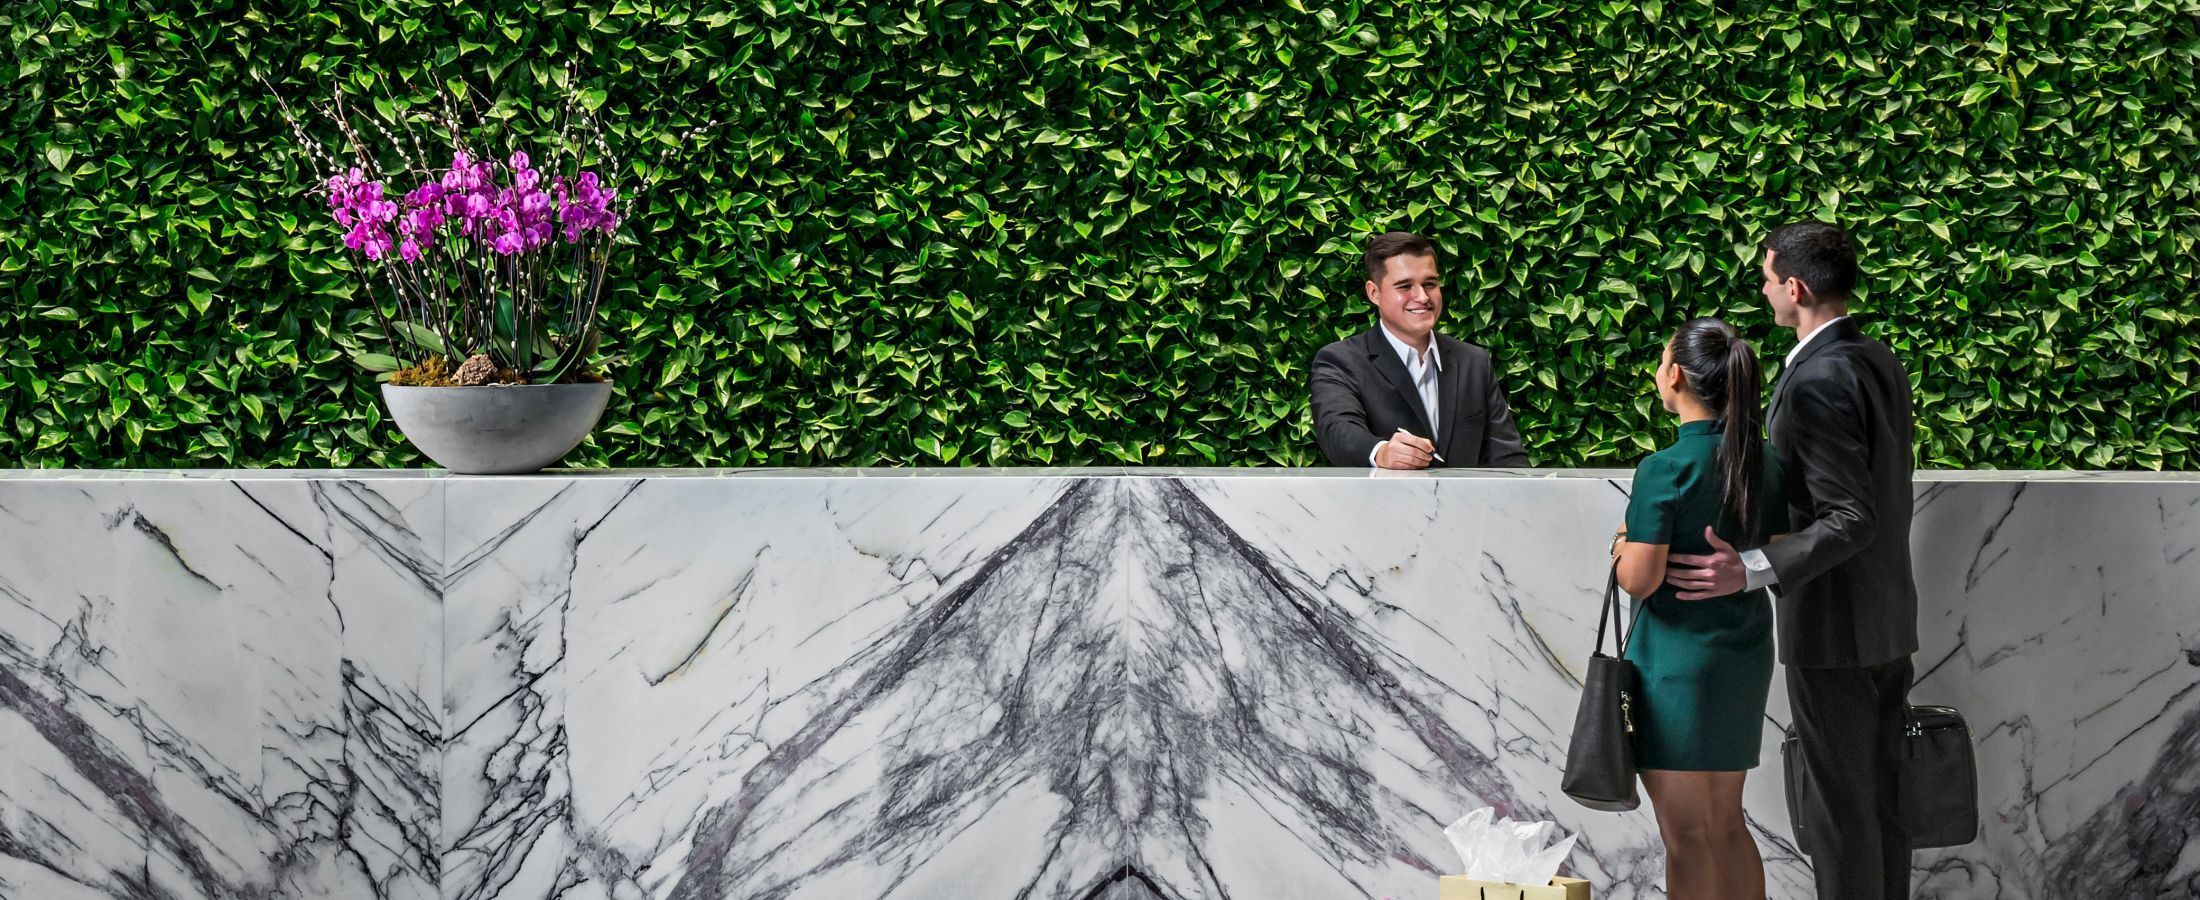 Behind our large, marble front desk is a gorgeous green living wall